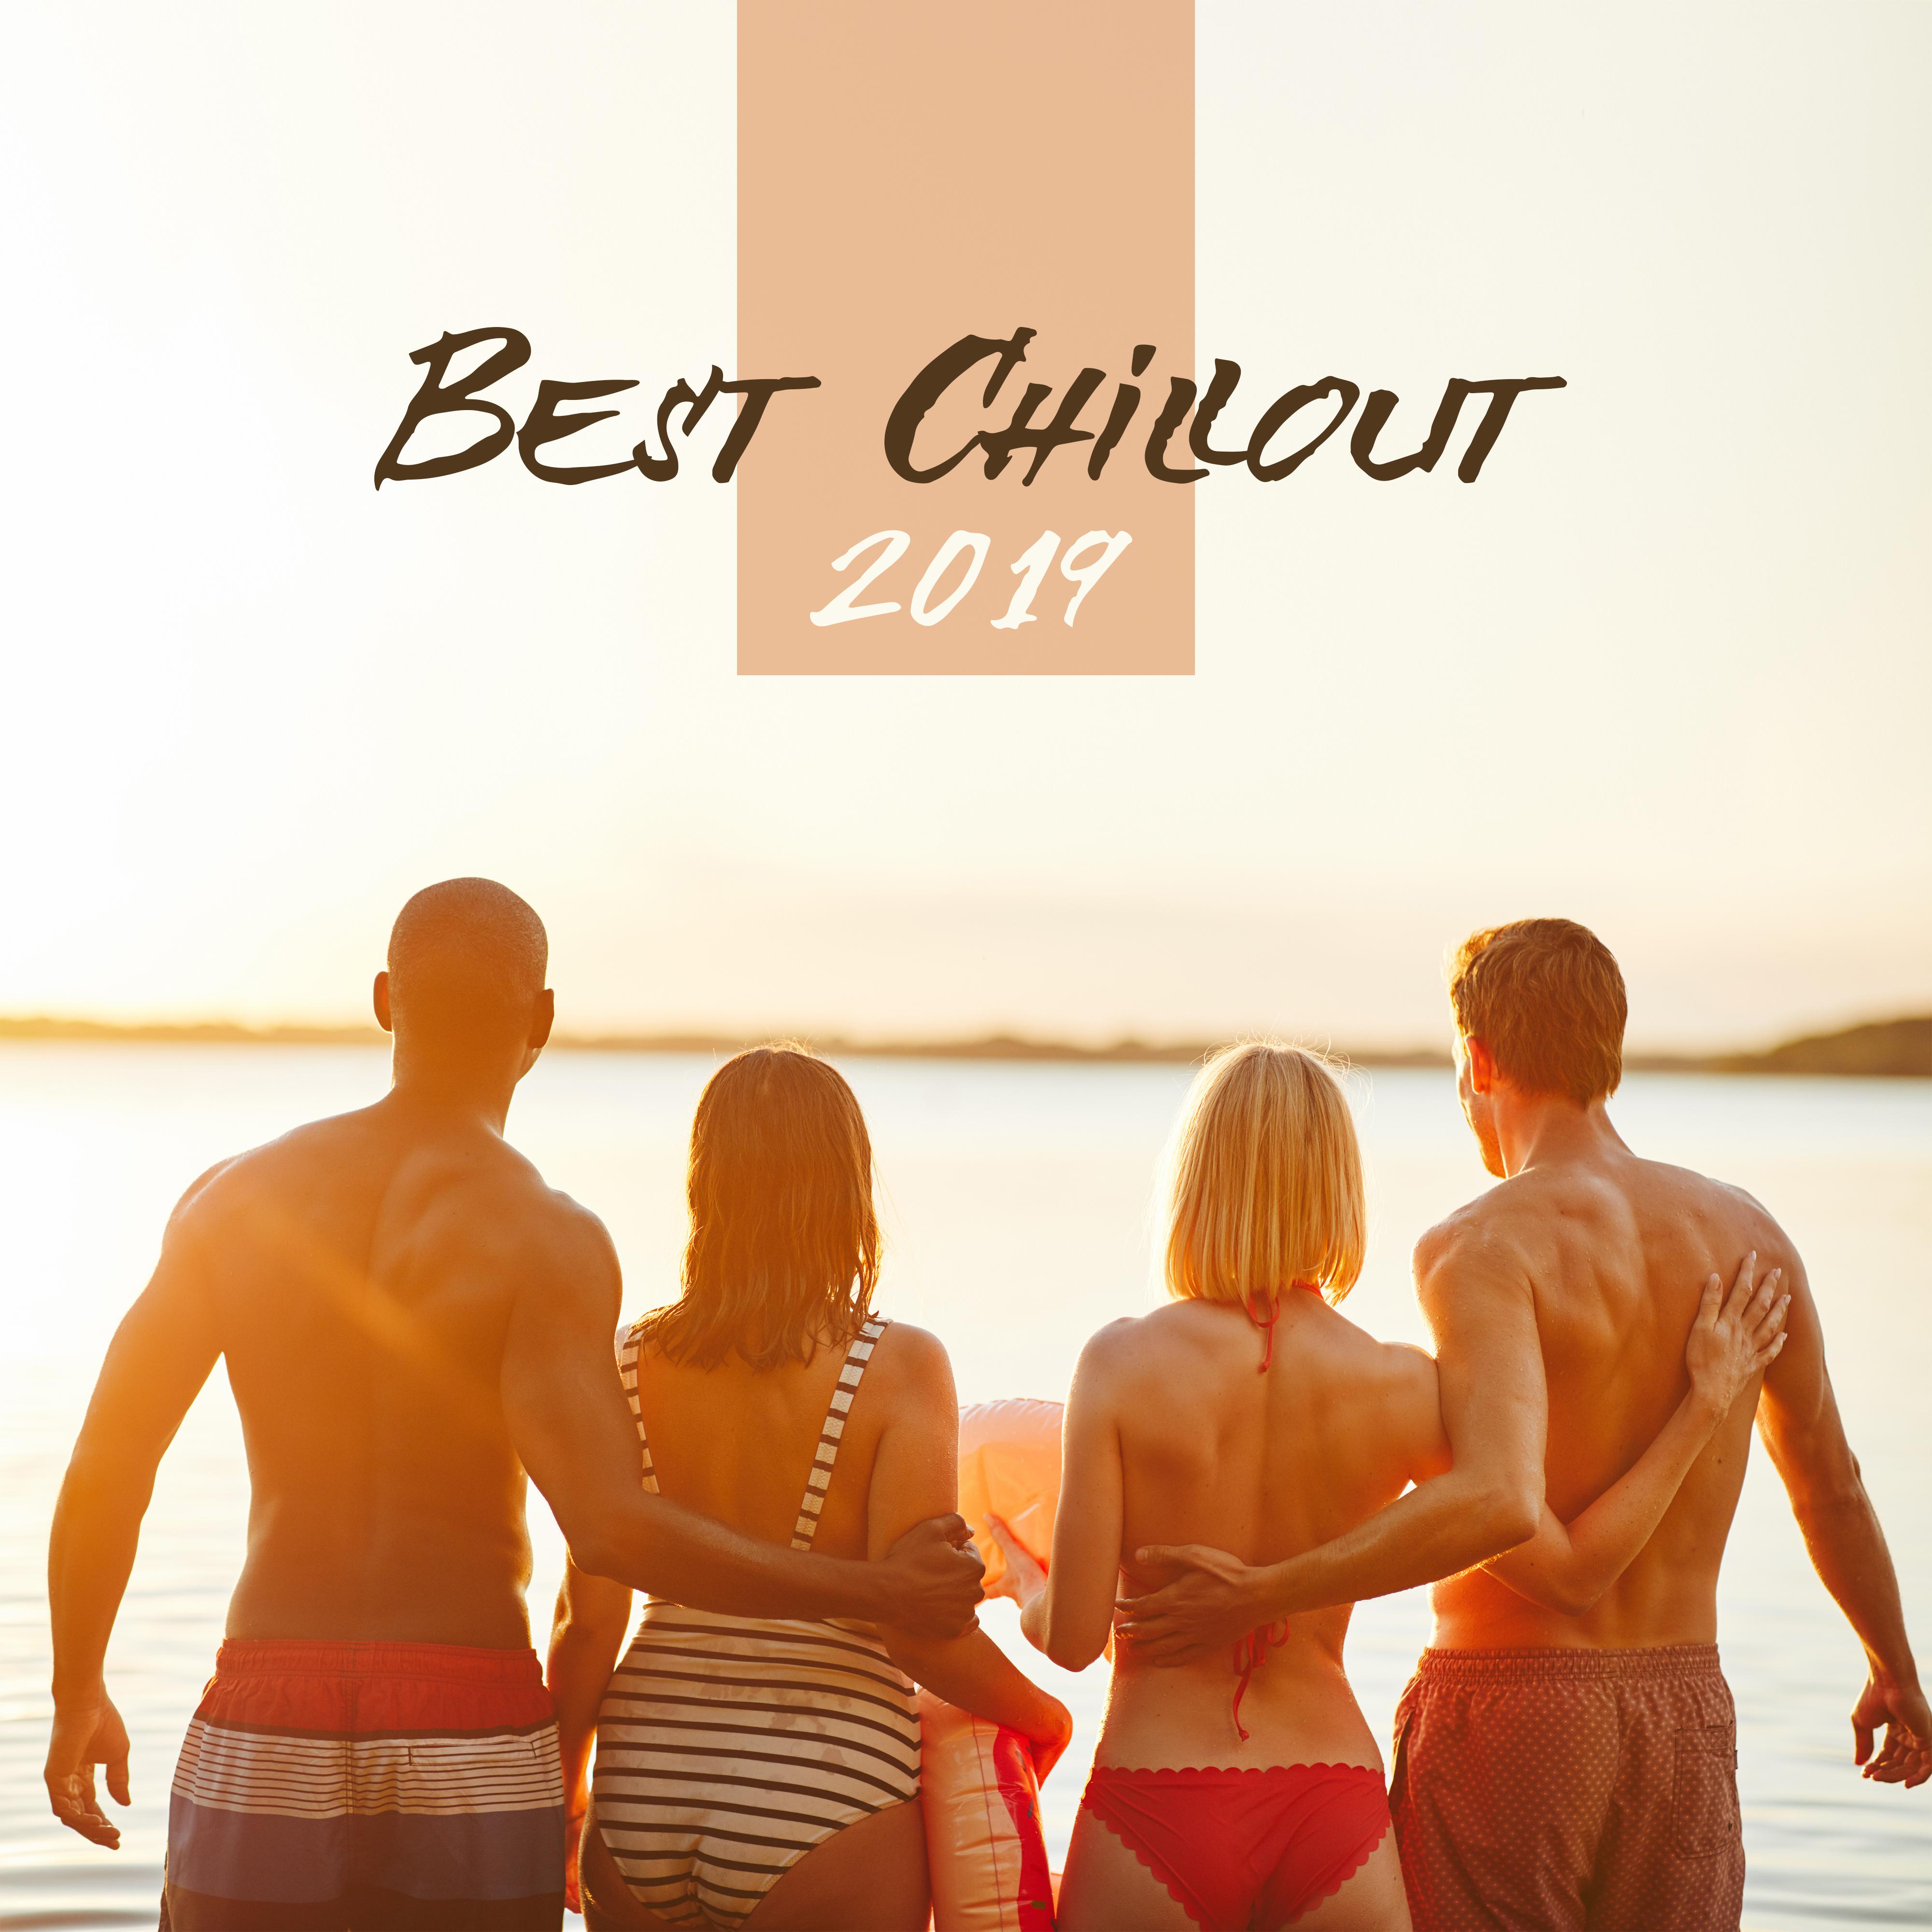 Best Chillout 2019  Most Relaxing Electronic Chill Out Music for Total Calming Down, Full Rest on Tropical Vacation, Sunny Holiday Positive Vibrations